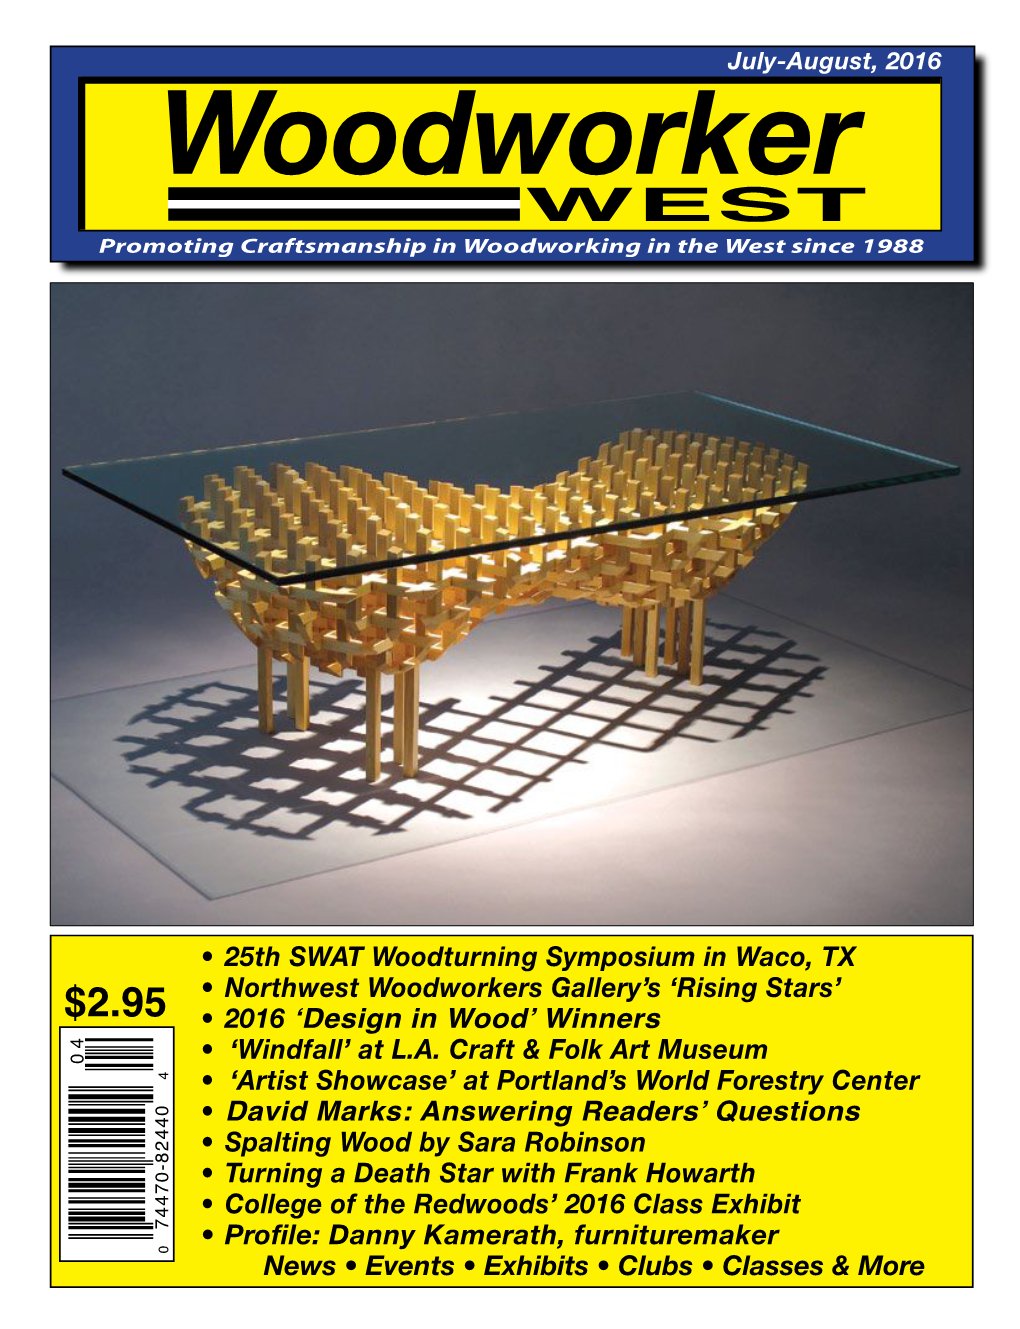 Woodworker WEST Promoting Craftsmanship in Woodworking in the West Since 1988